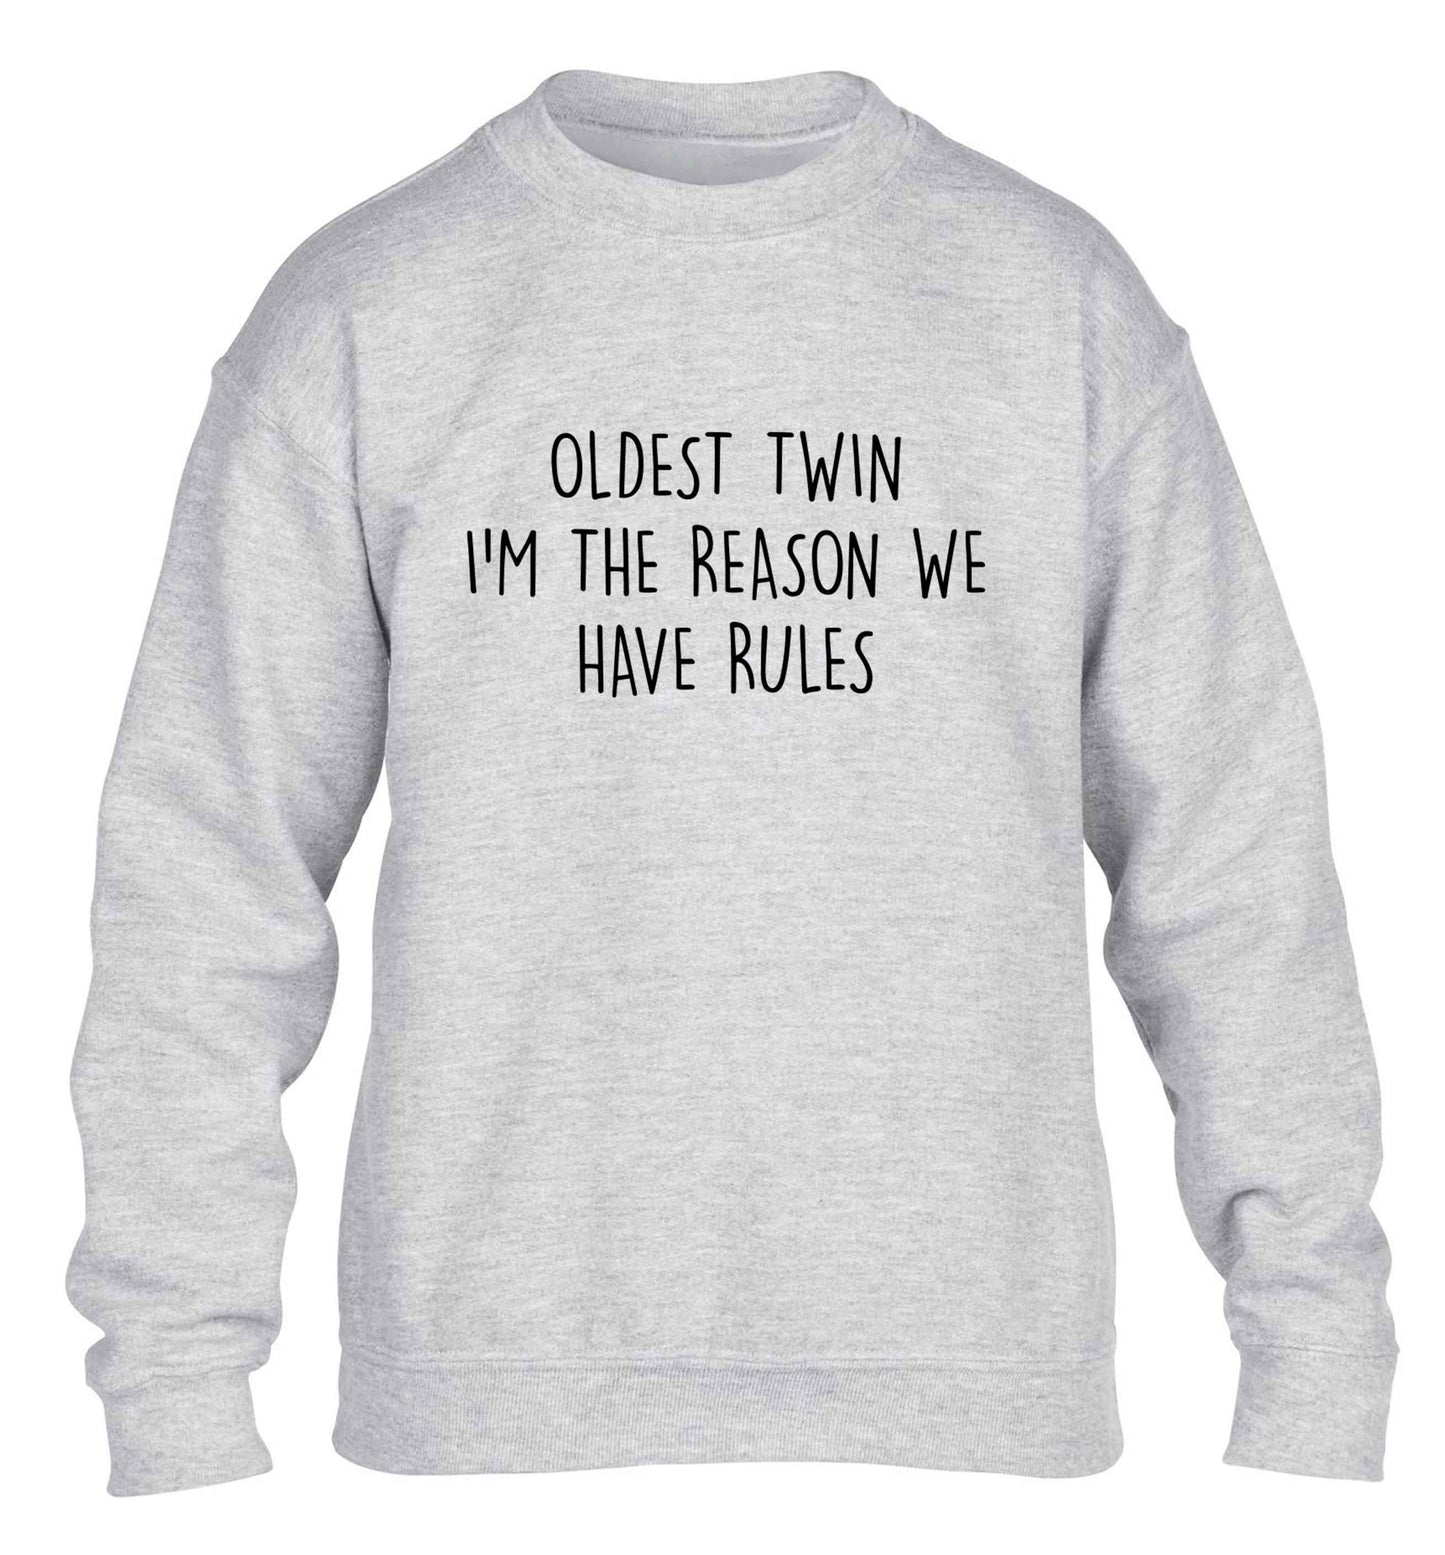 Oldest twin I'm the reason we have rules children's grey sweater 12-13 Years